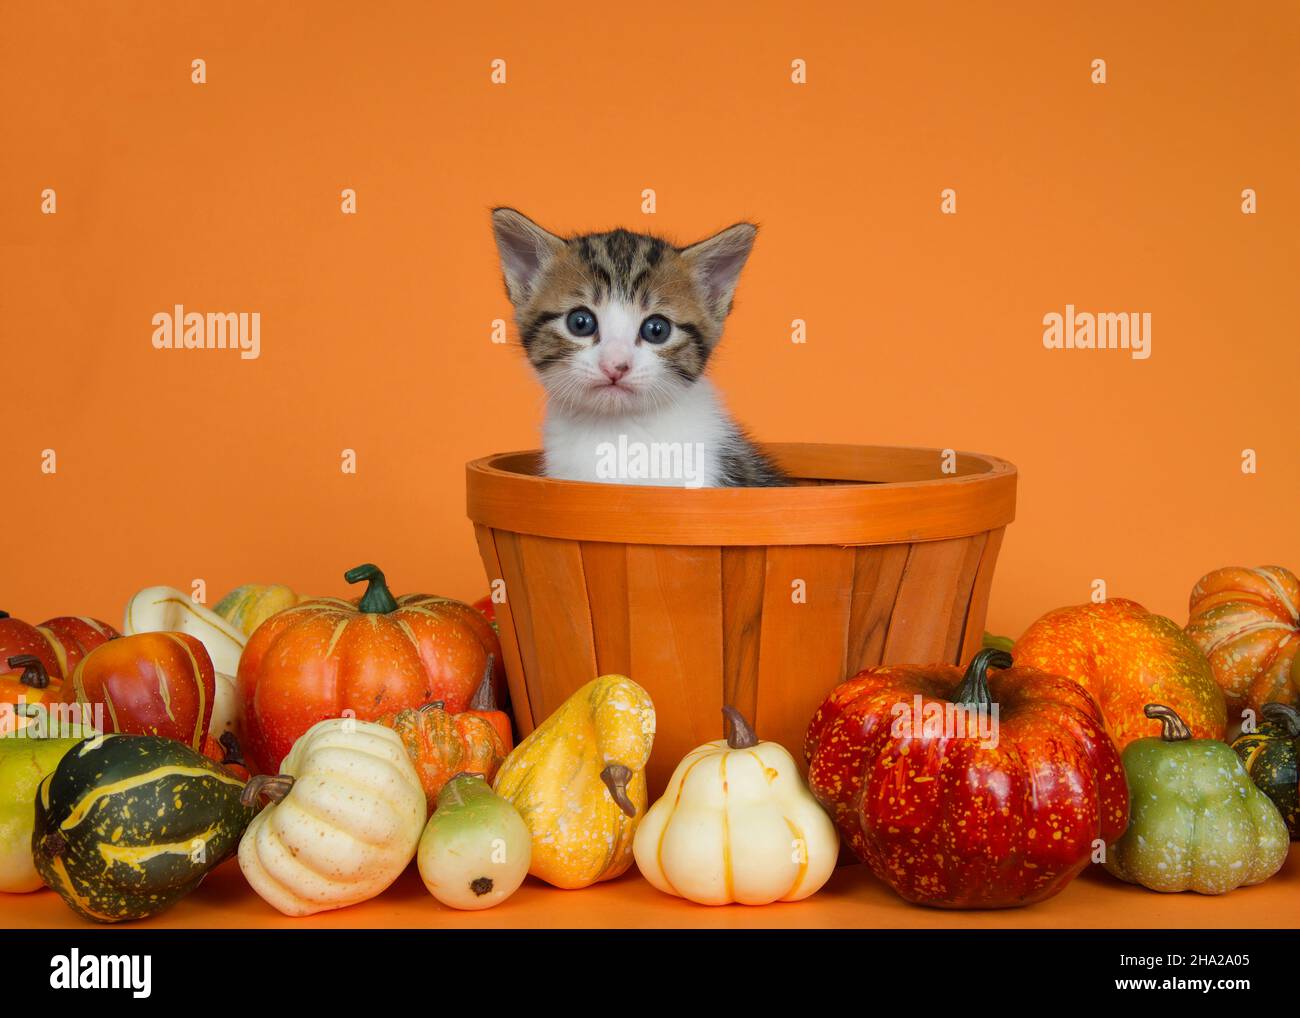 Tri color white, gray and orange kitten sitting in an orange wicker basket surrounded by autumn squash, pumpkins and gourds on an orange background. Stock Photo